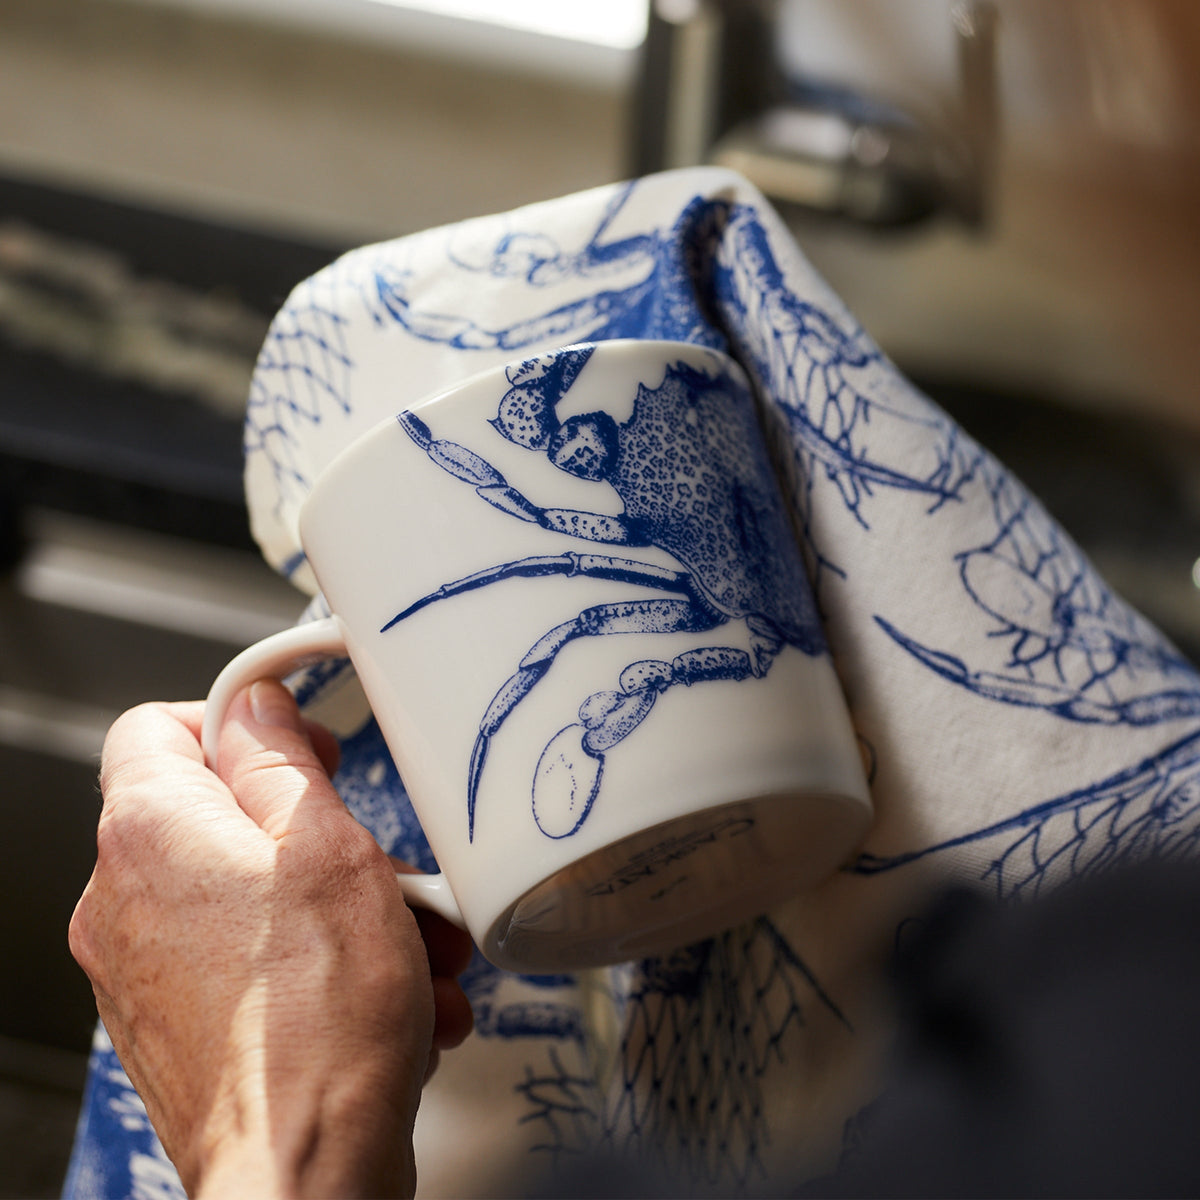 A person is drying a high-fired porcelain Crab Mug from Caskata Artisanal Home with a dish towel featuring similar blue designs.